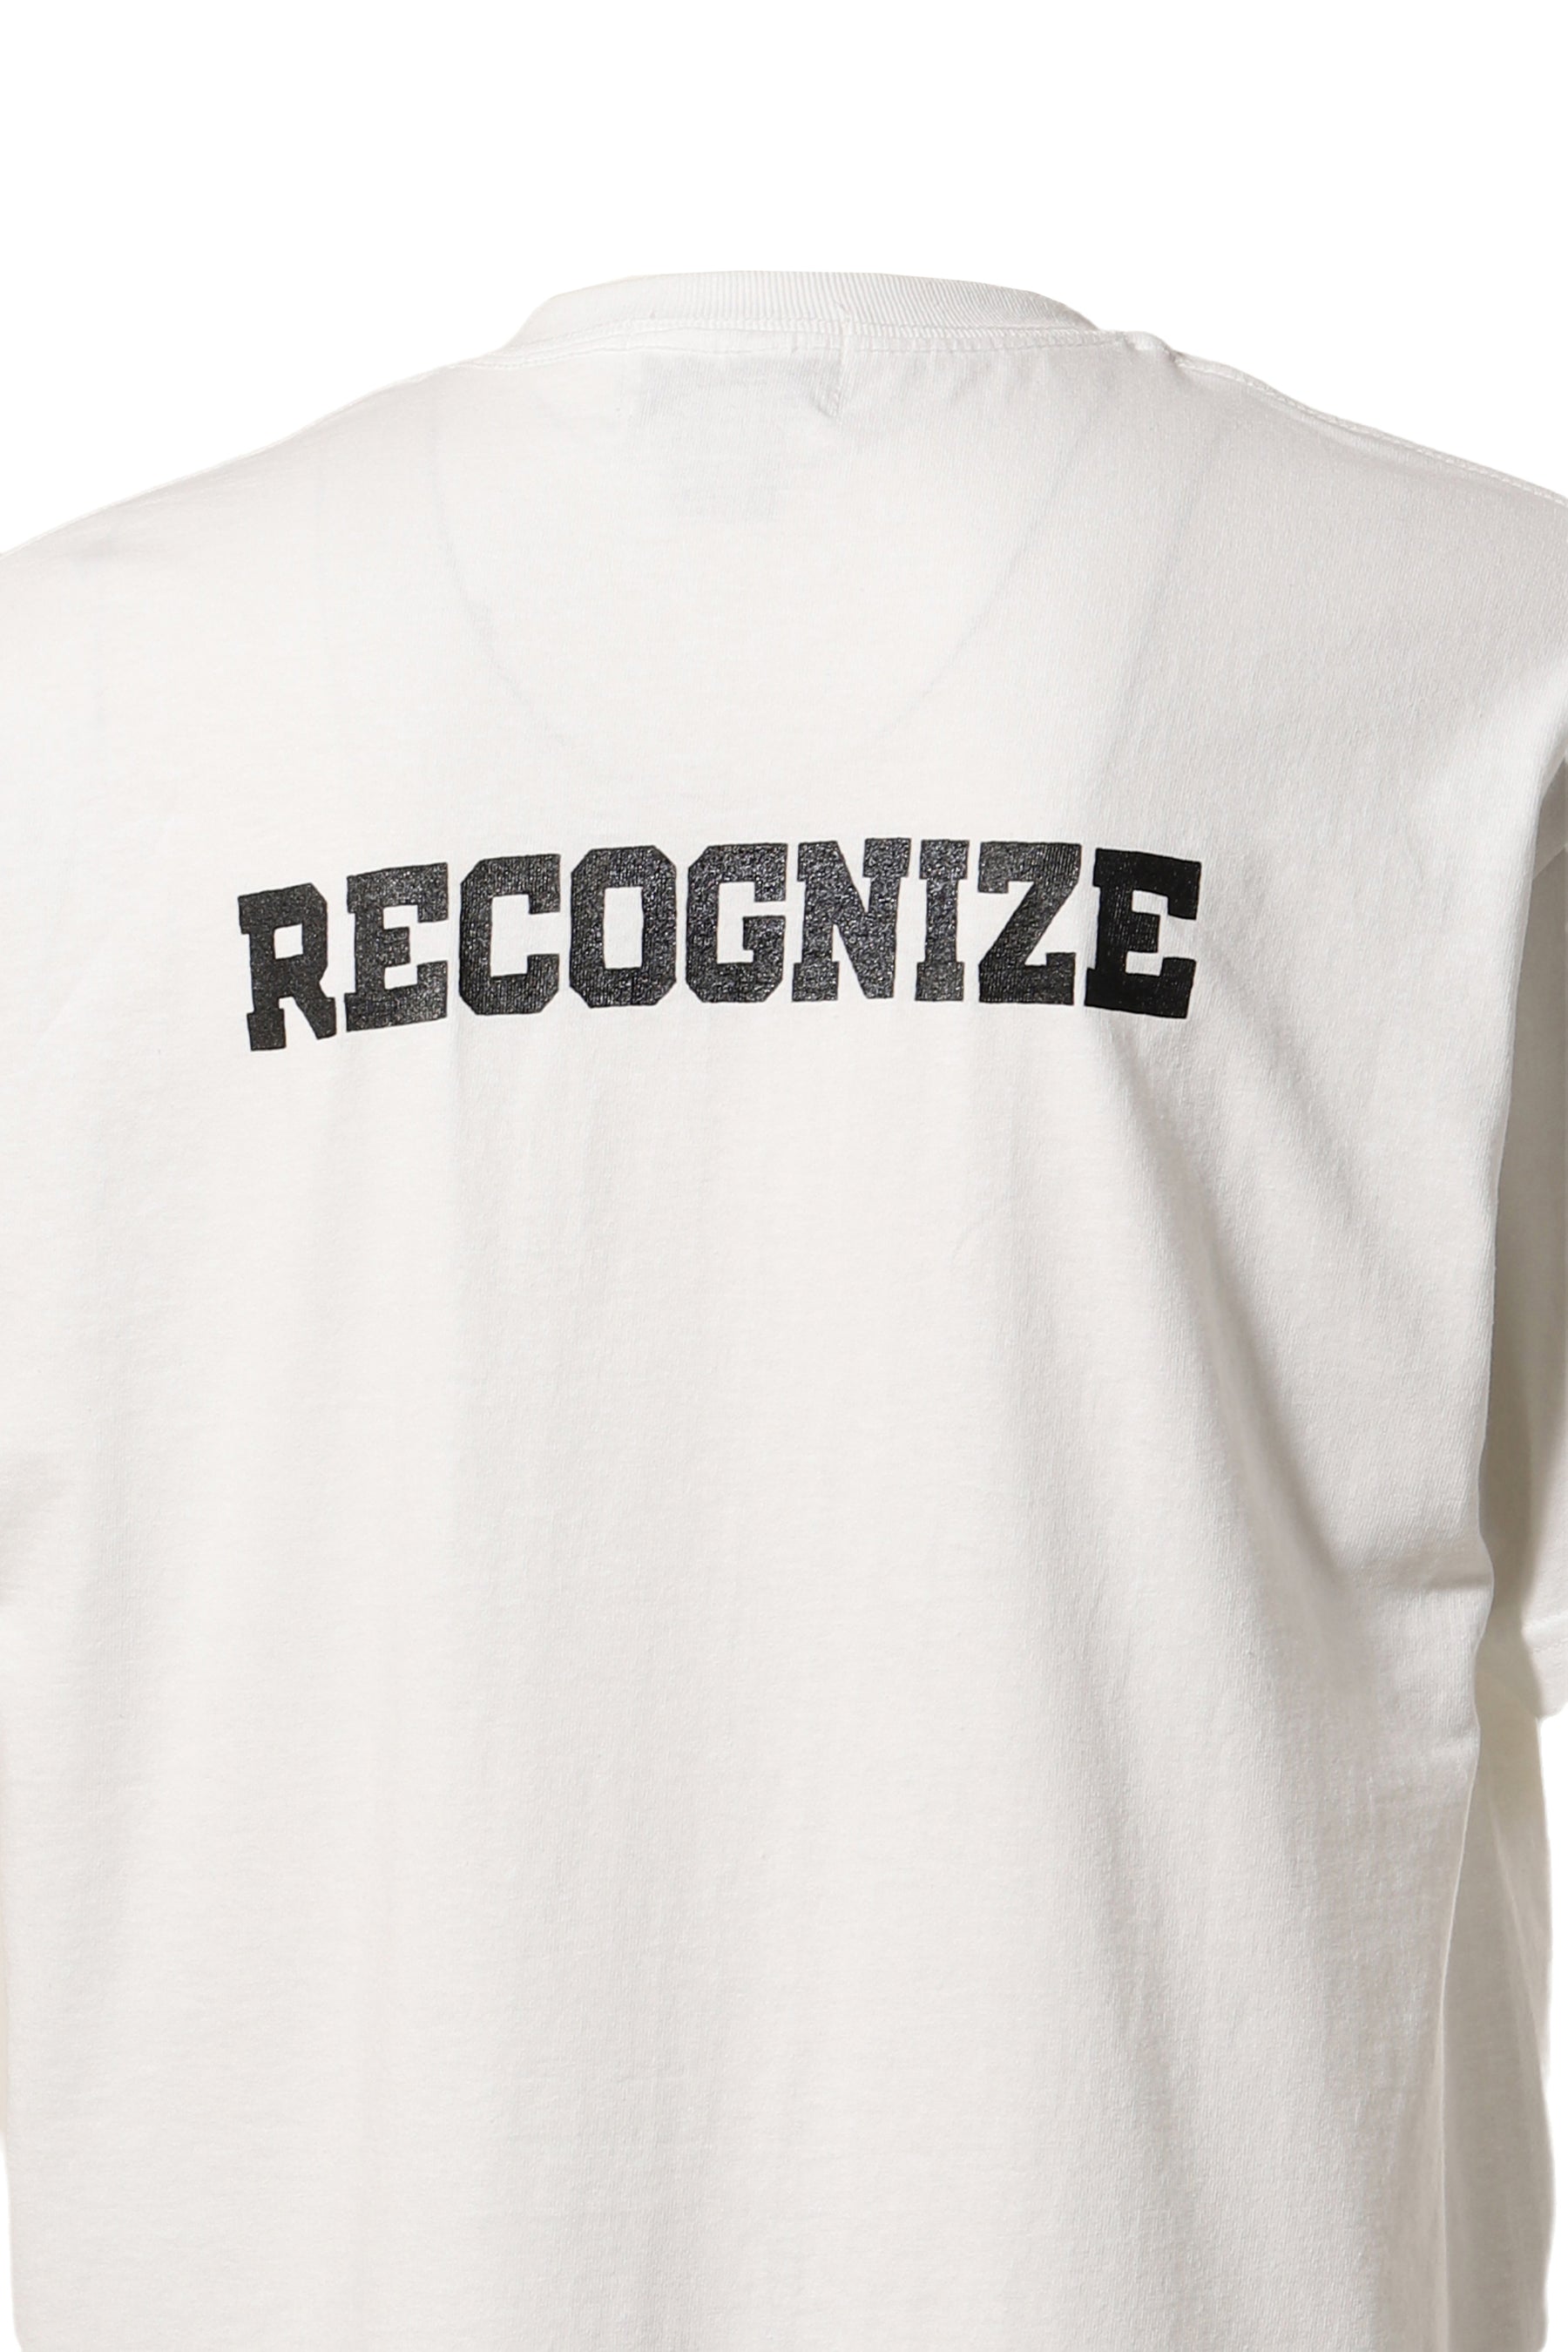 RECOGNIZE MICKEY MOUSE NEW YORK TEE / WHT